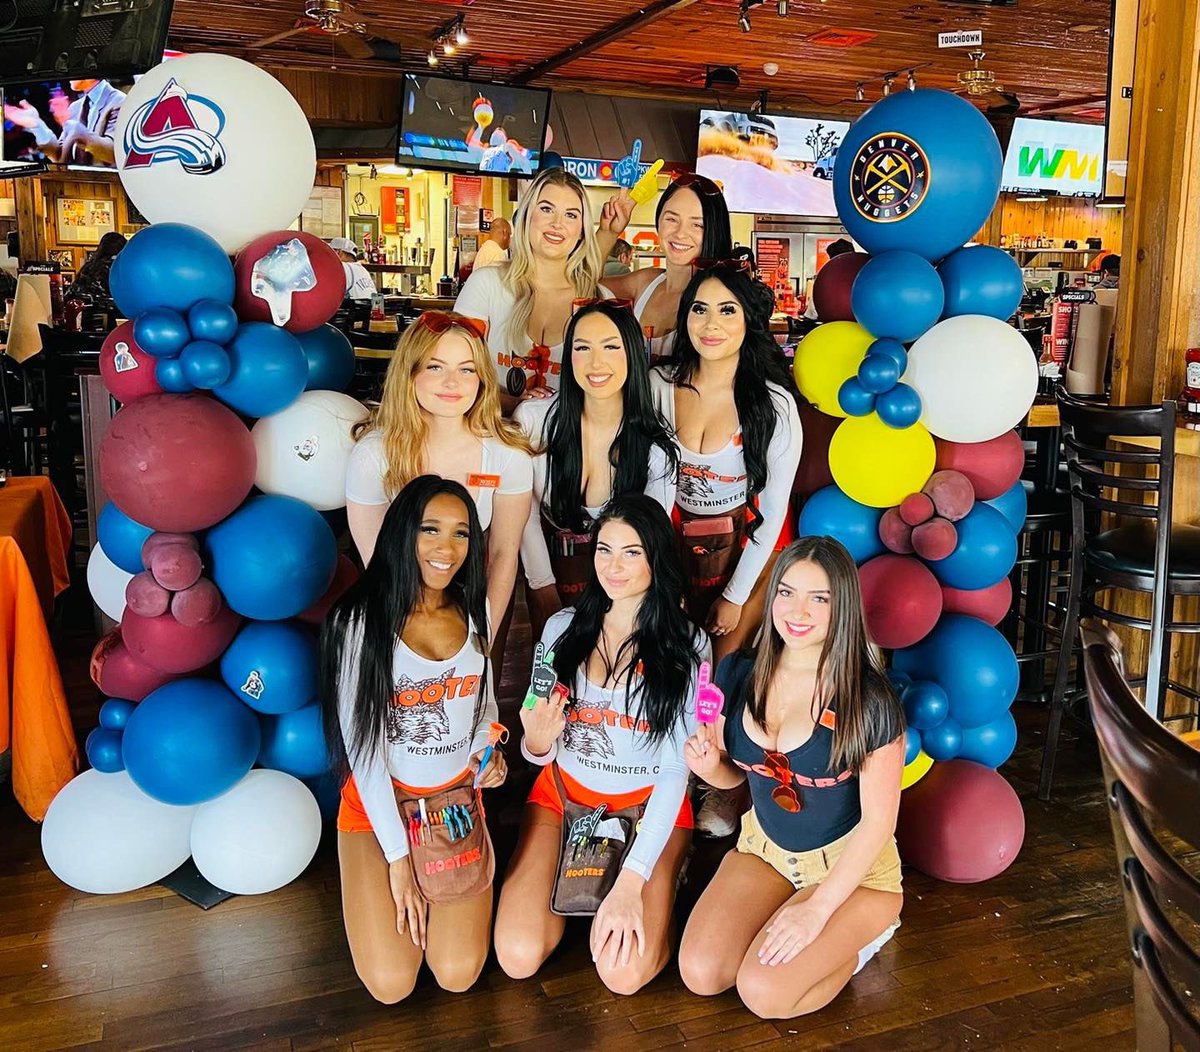 Don't miss your shot to watch Playoff action at Hooters! 🏀🍻 #NBA